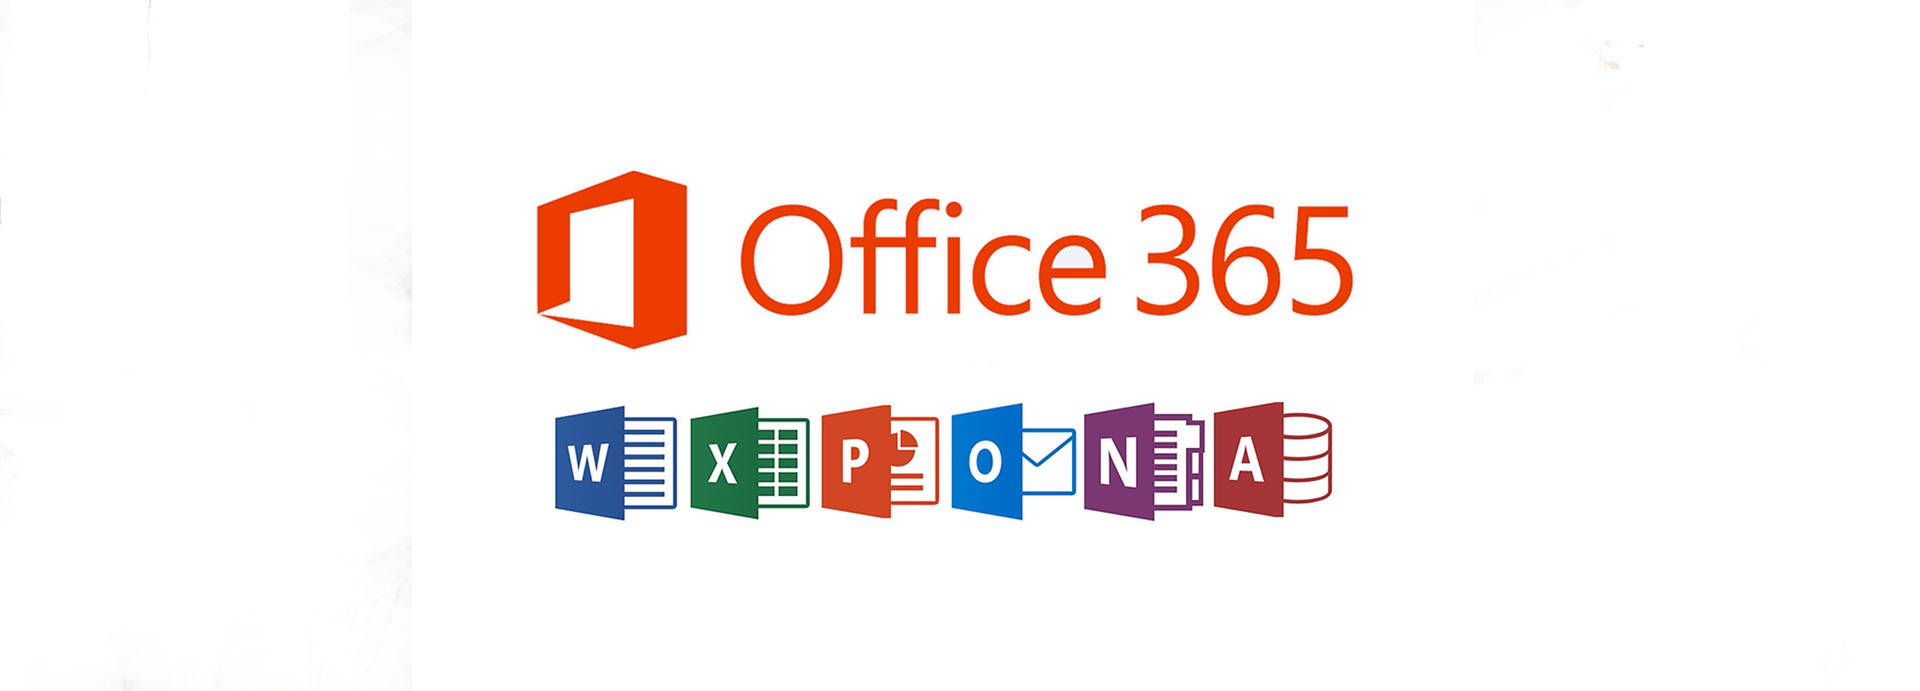 Office 365 Application Icon Background